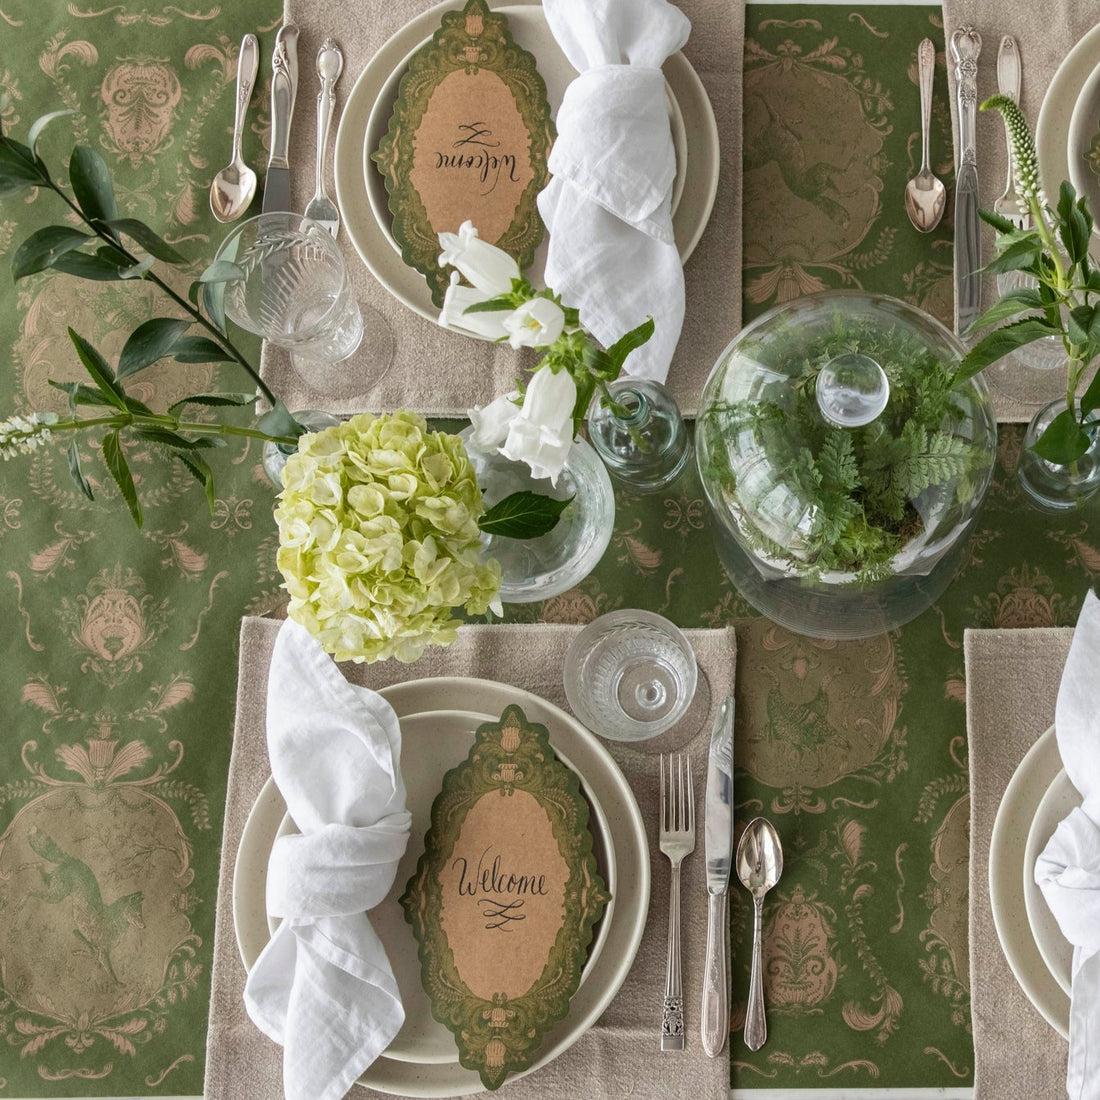 The Moss Fable Toile Runner under an elegant table setting, from above.